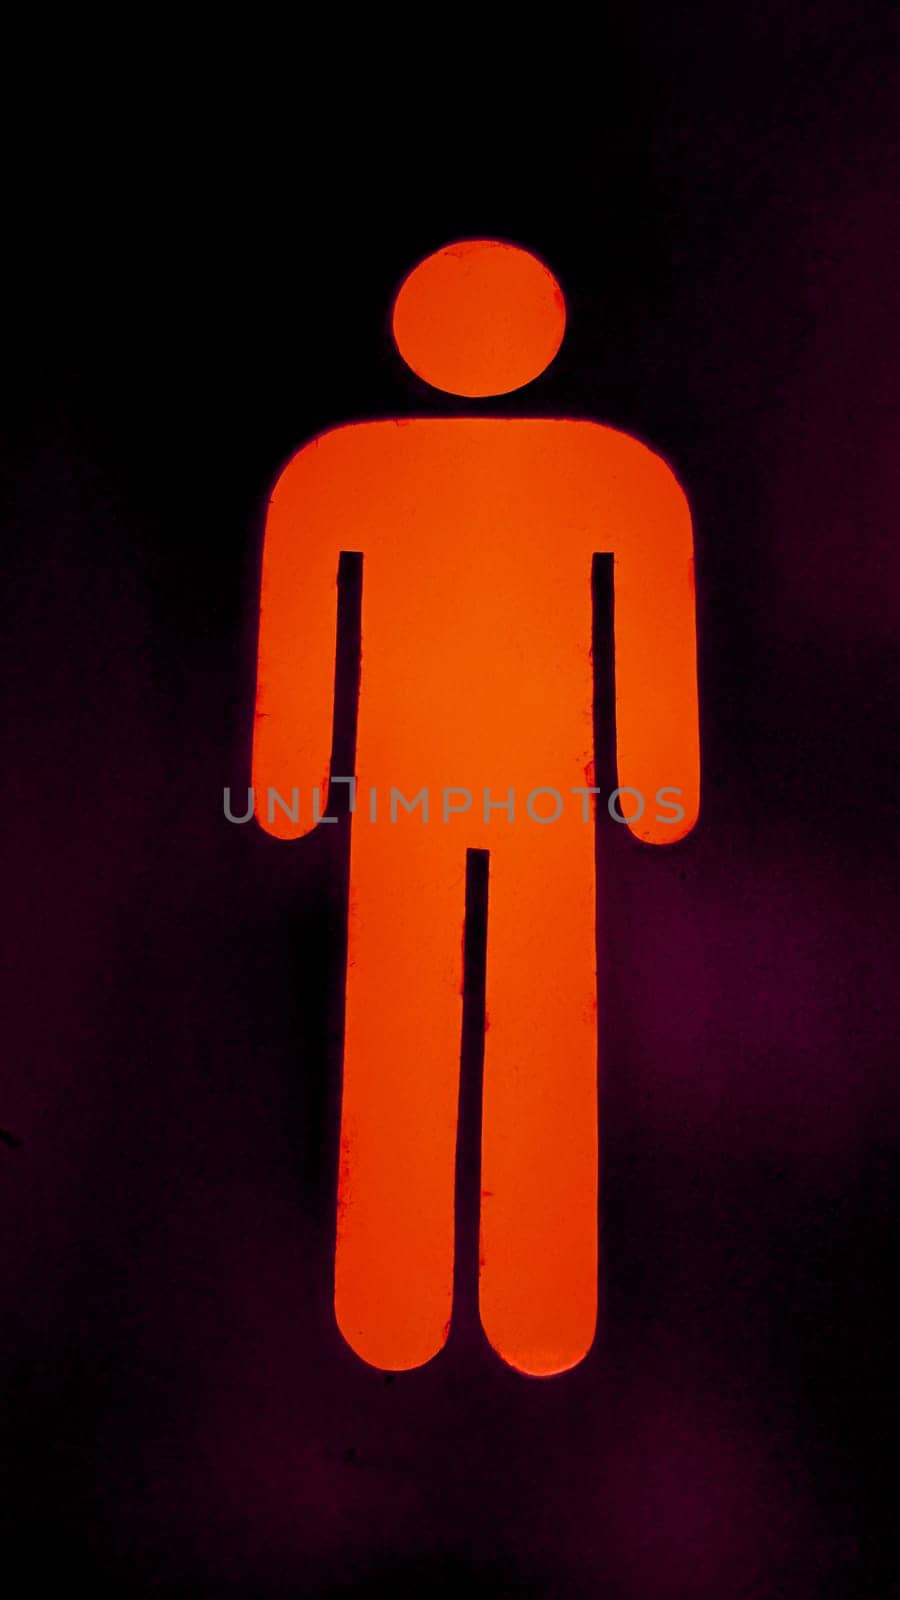 Men's signage and Symbol sign to indicate certain designated area with vibrant color by antoksena